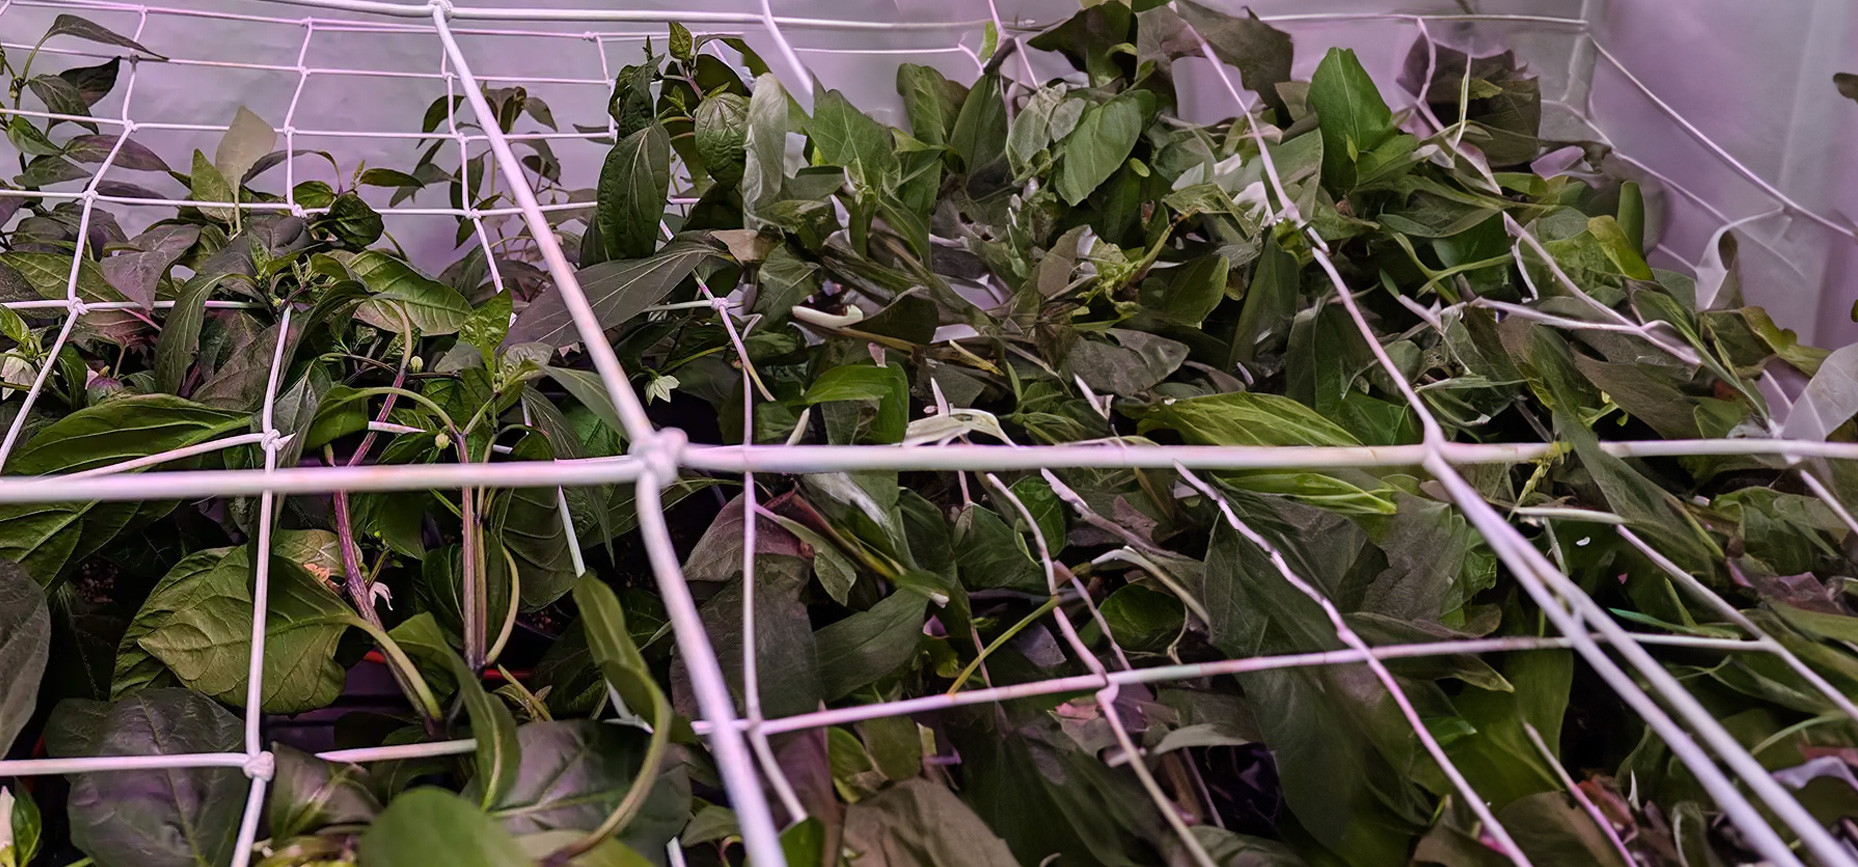 The SCROG technique: optimizing your growing space